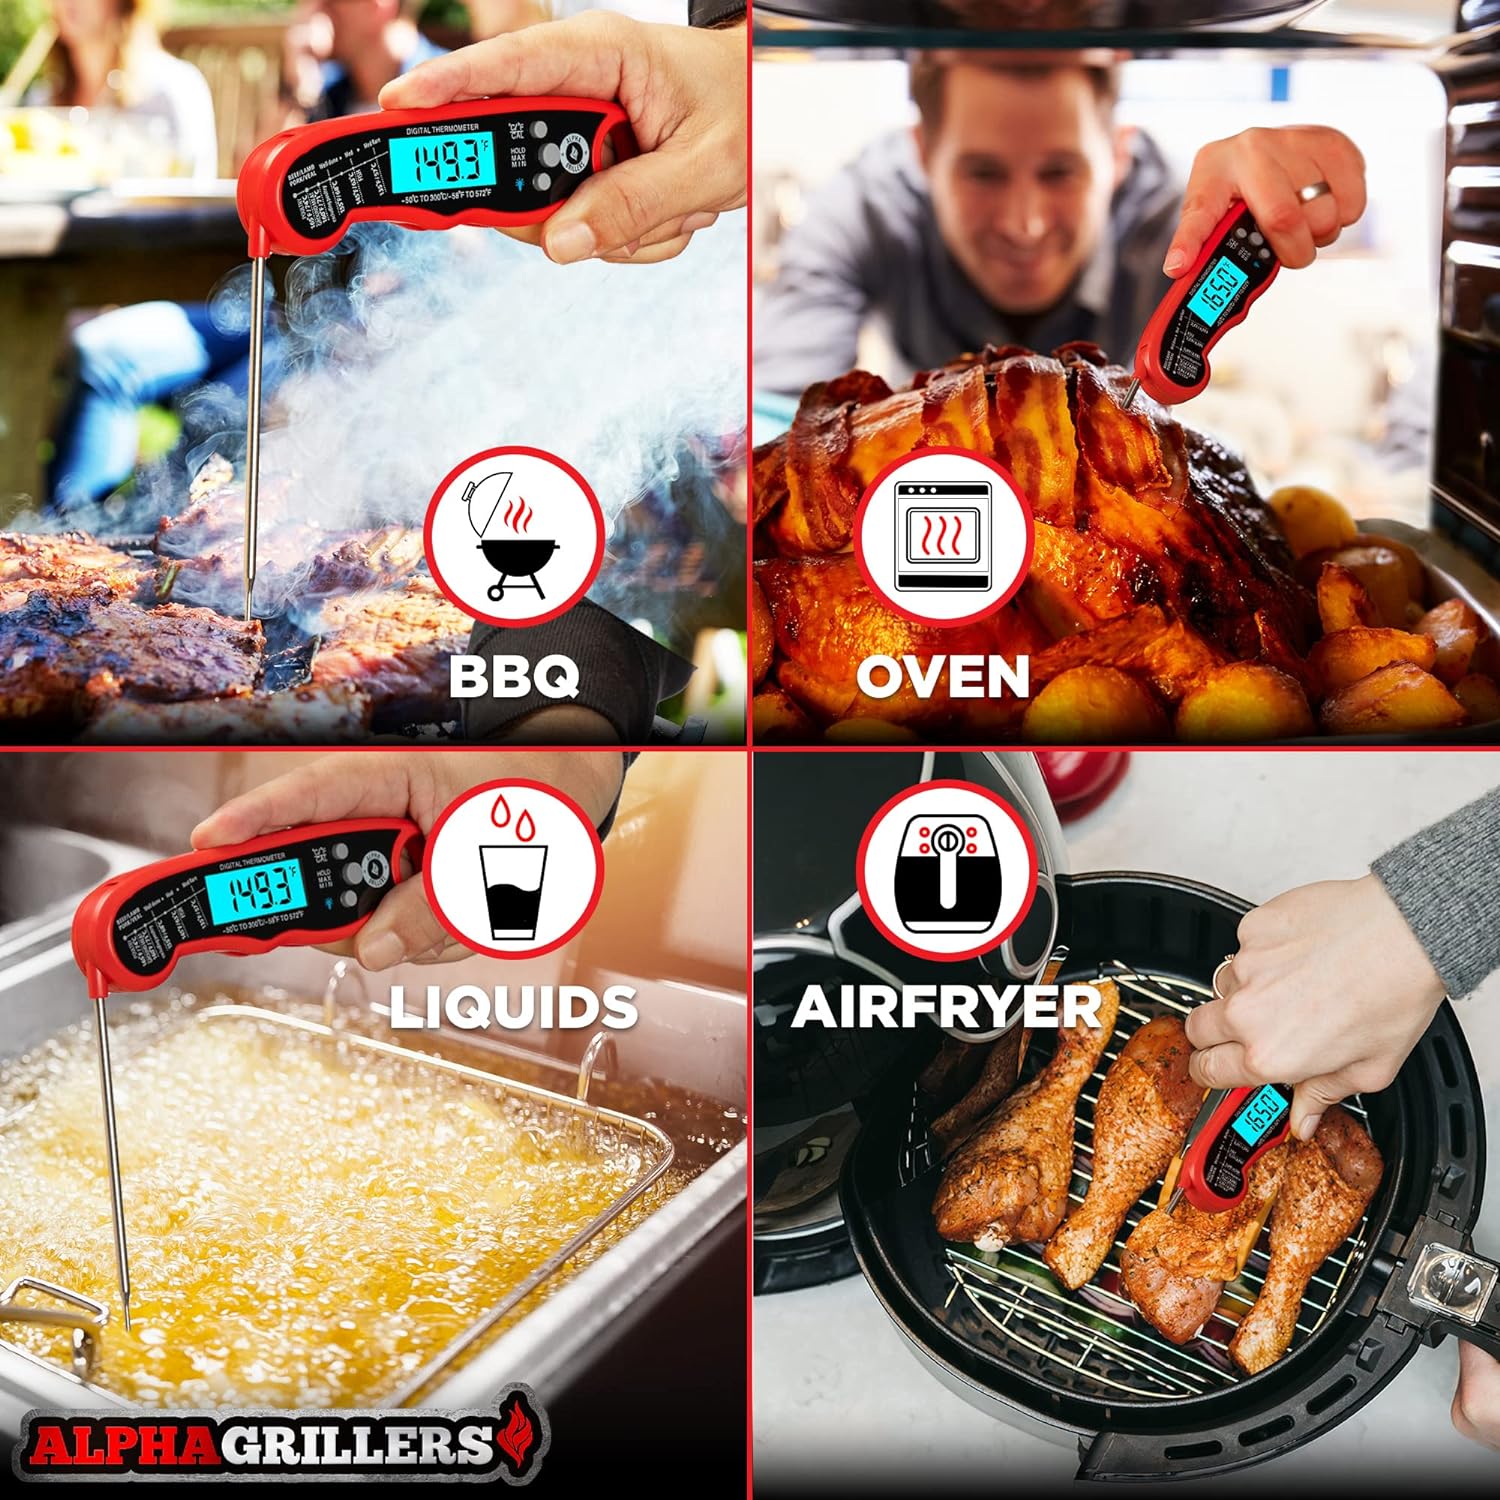 Alpha Grillers Instant Read Meat Thermometer for Grill and Cooking. Best Waterproof Ultra Fast Thermometer with Backlight  Calibration. Digital Food Probe for Kitchen, Outdoor Grilling and BBQ!